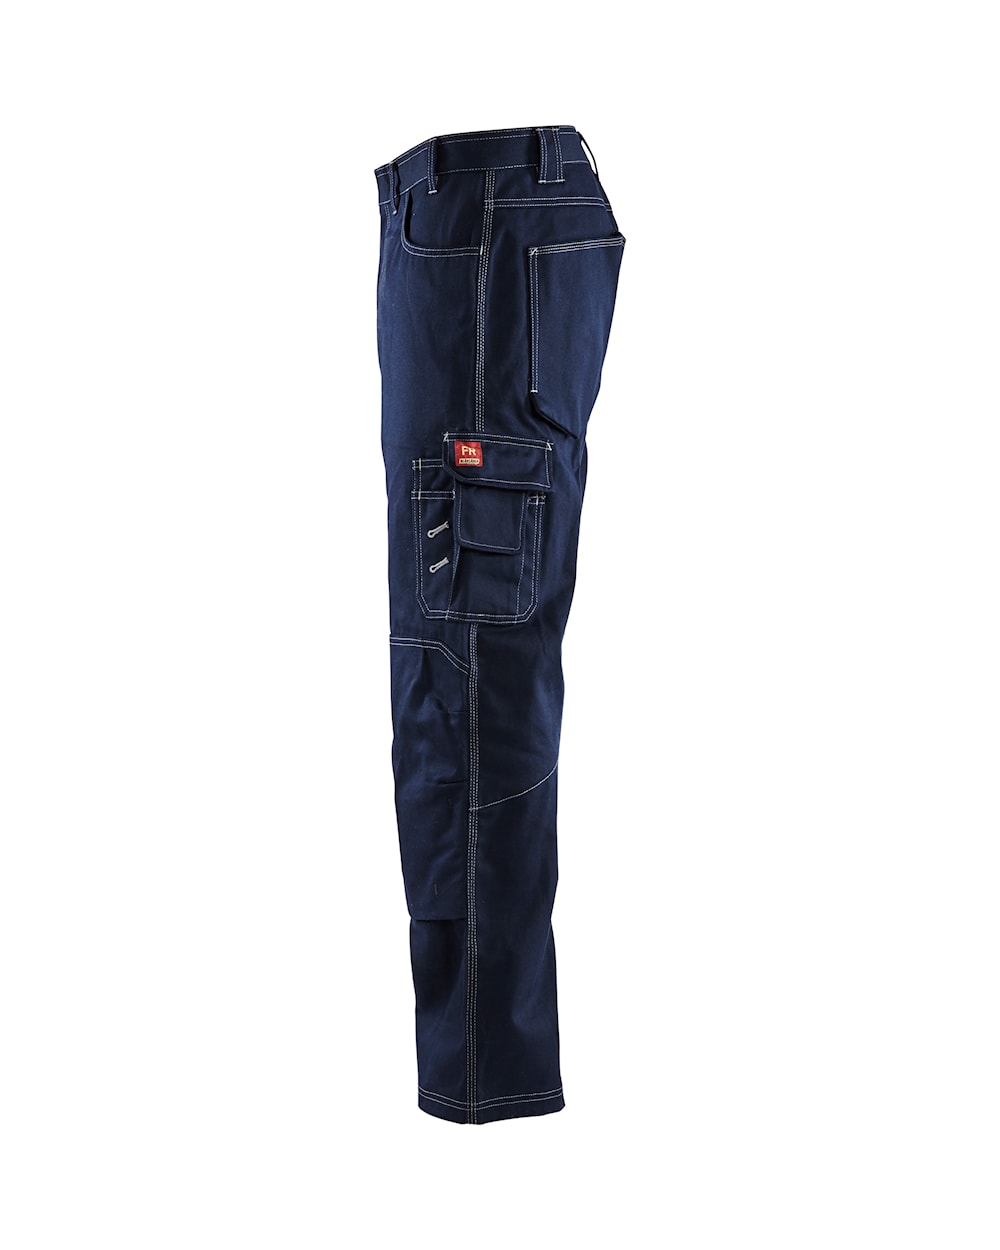 Blaklader 1676 Fire Resistant Pants from GME Supply